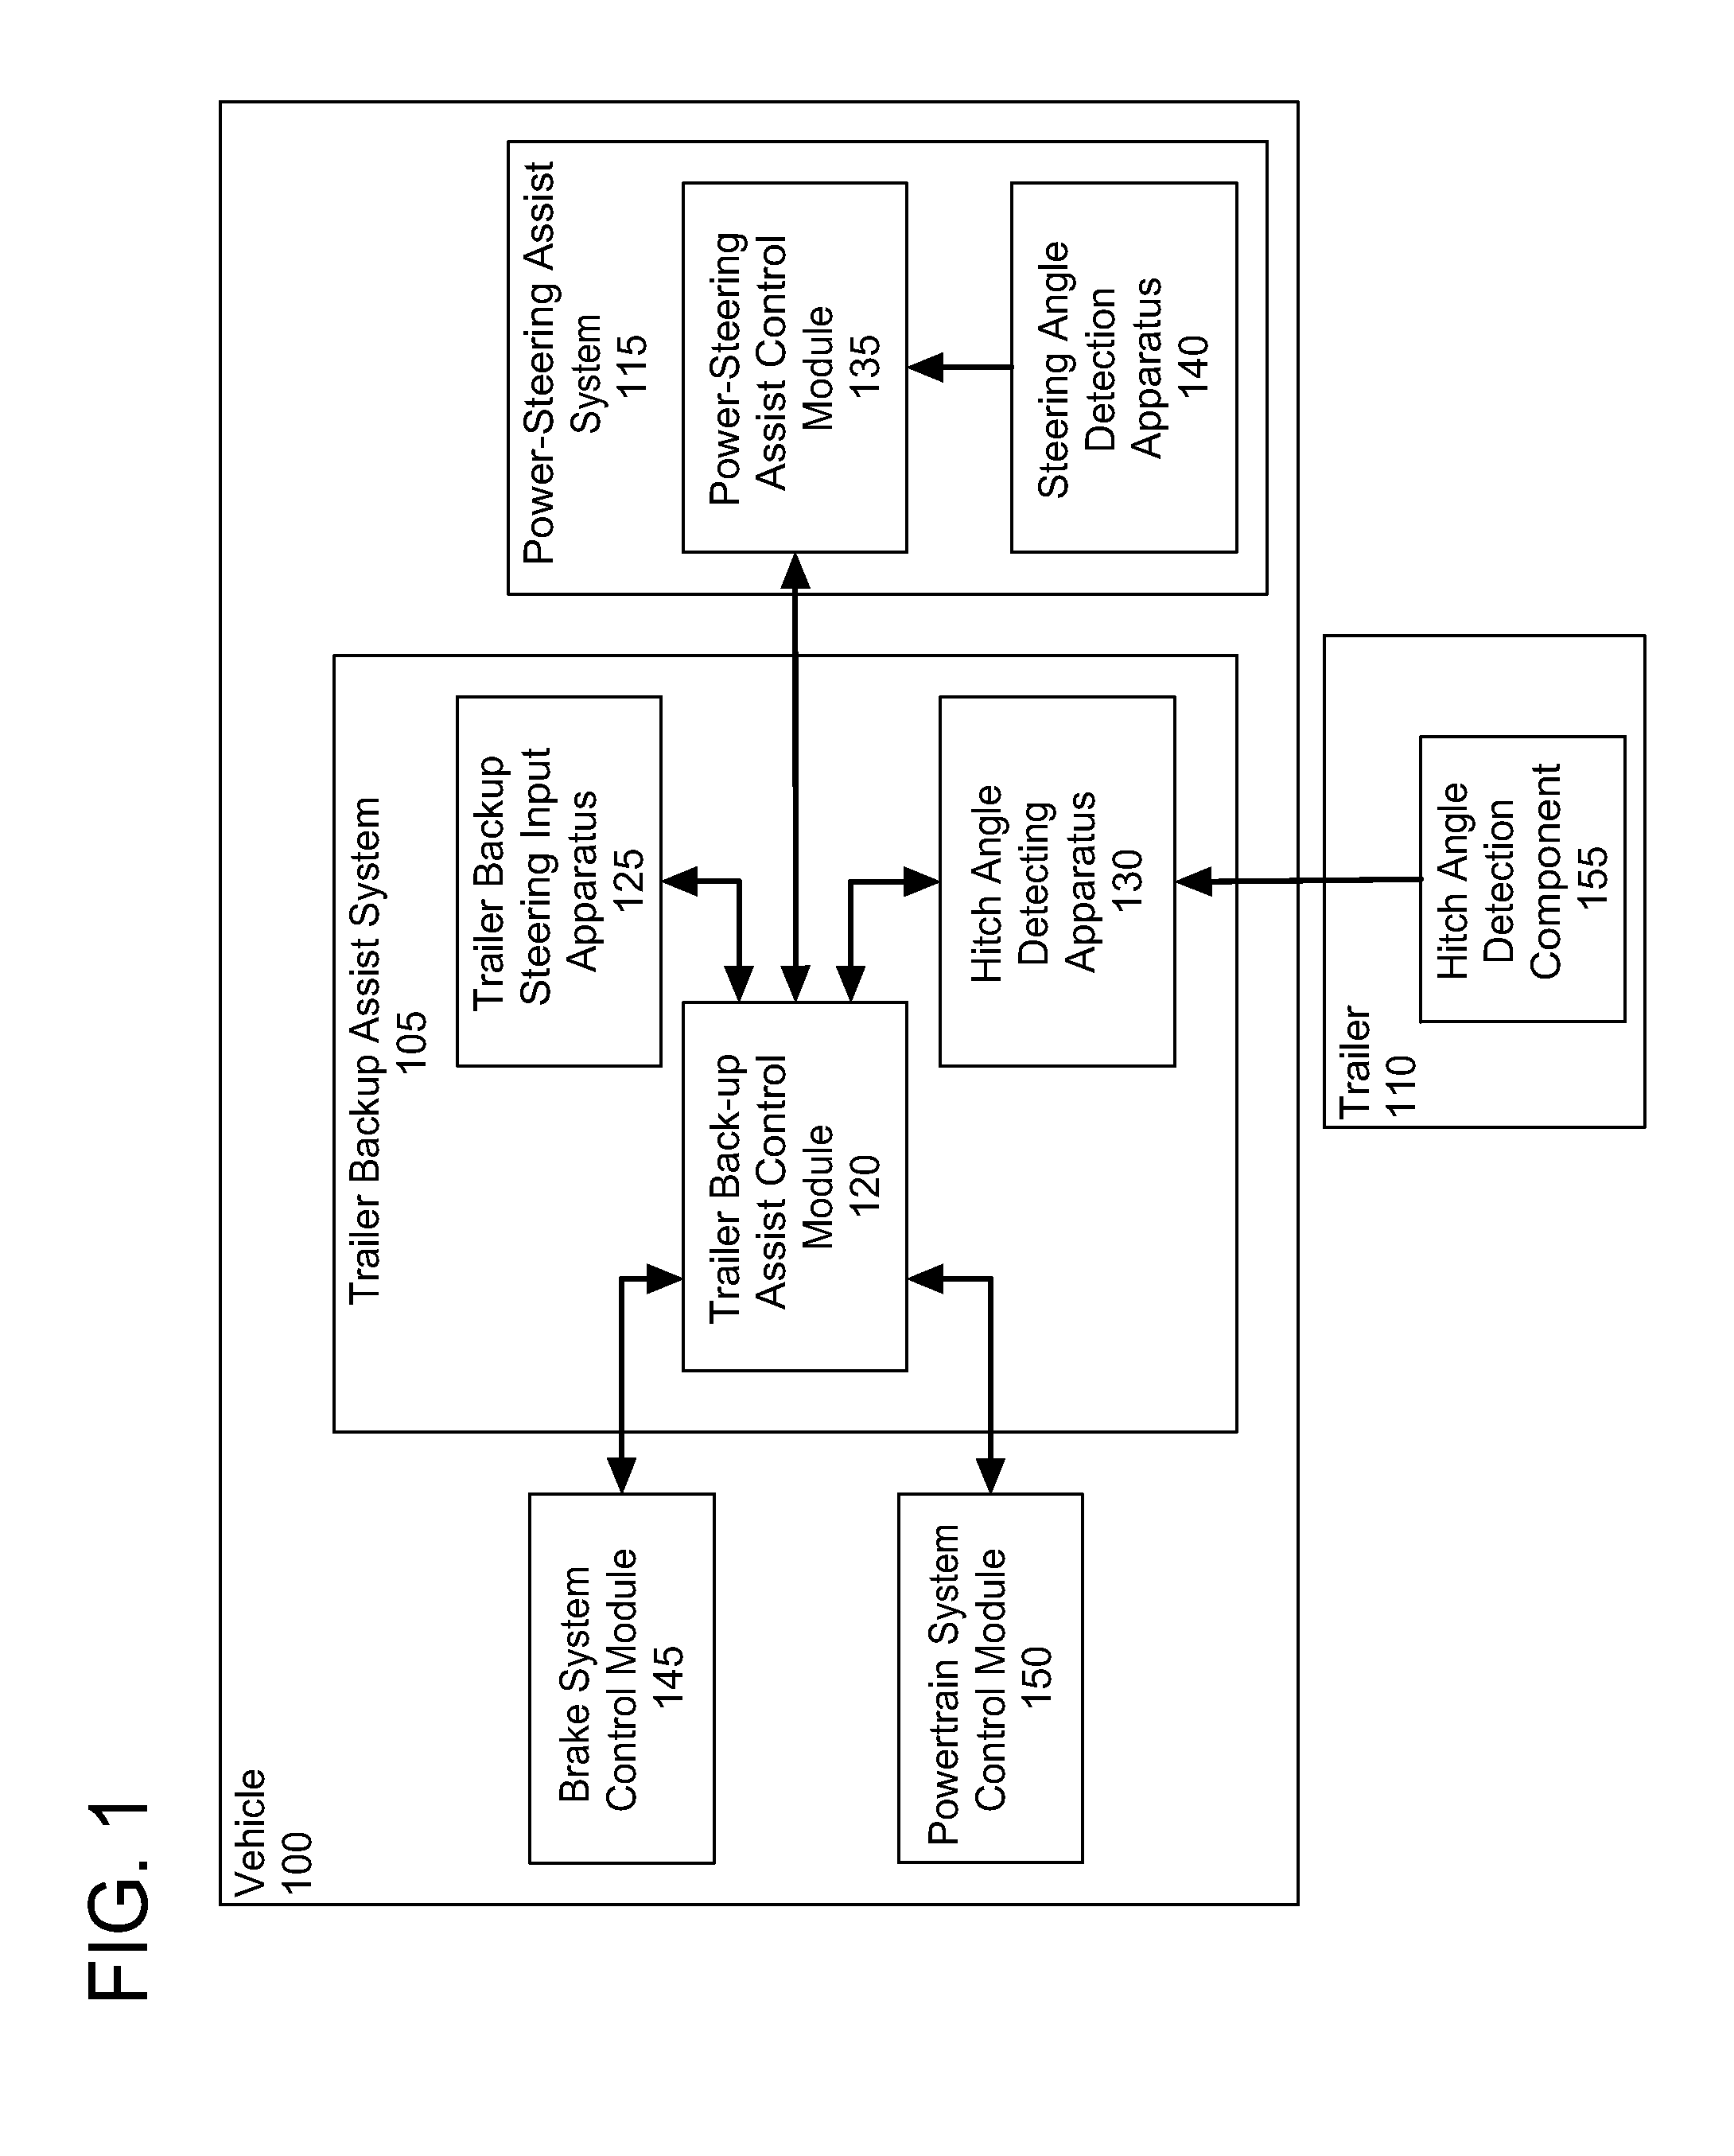 Trailer target monitoring system and method